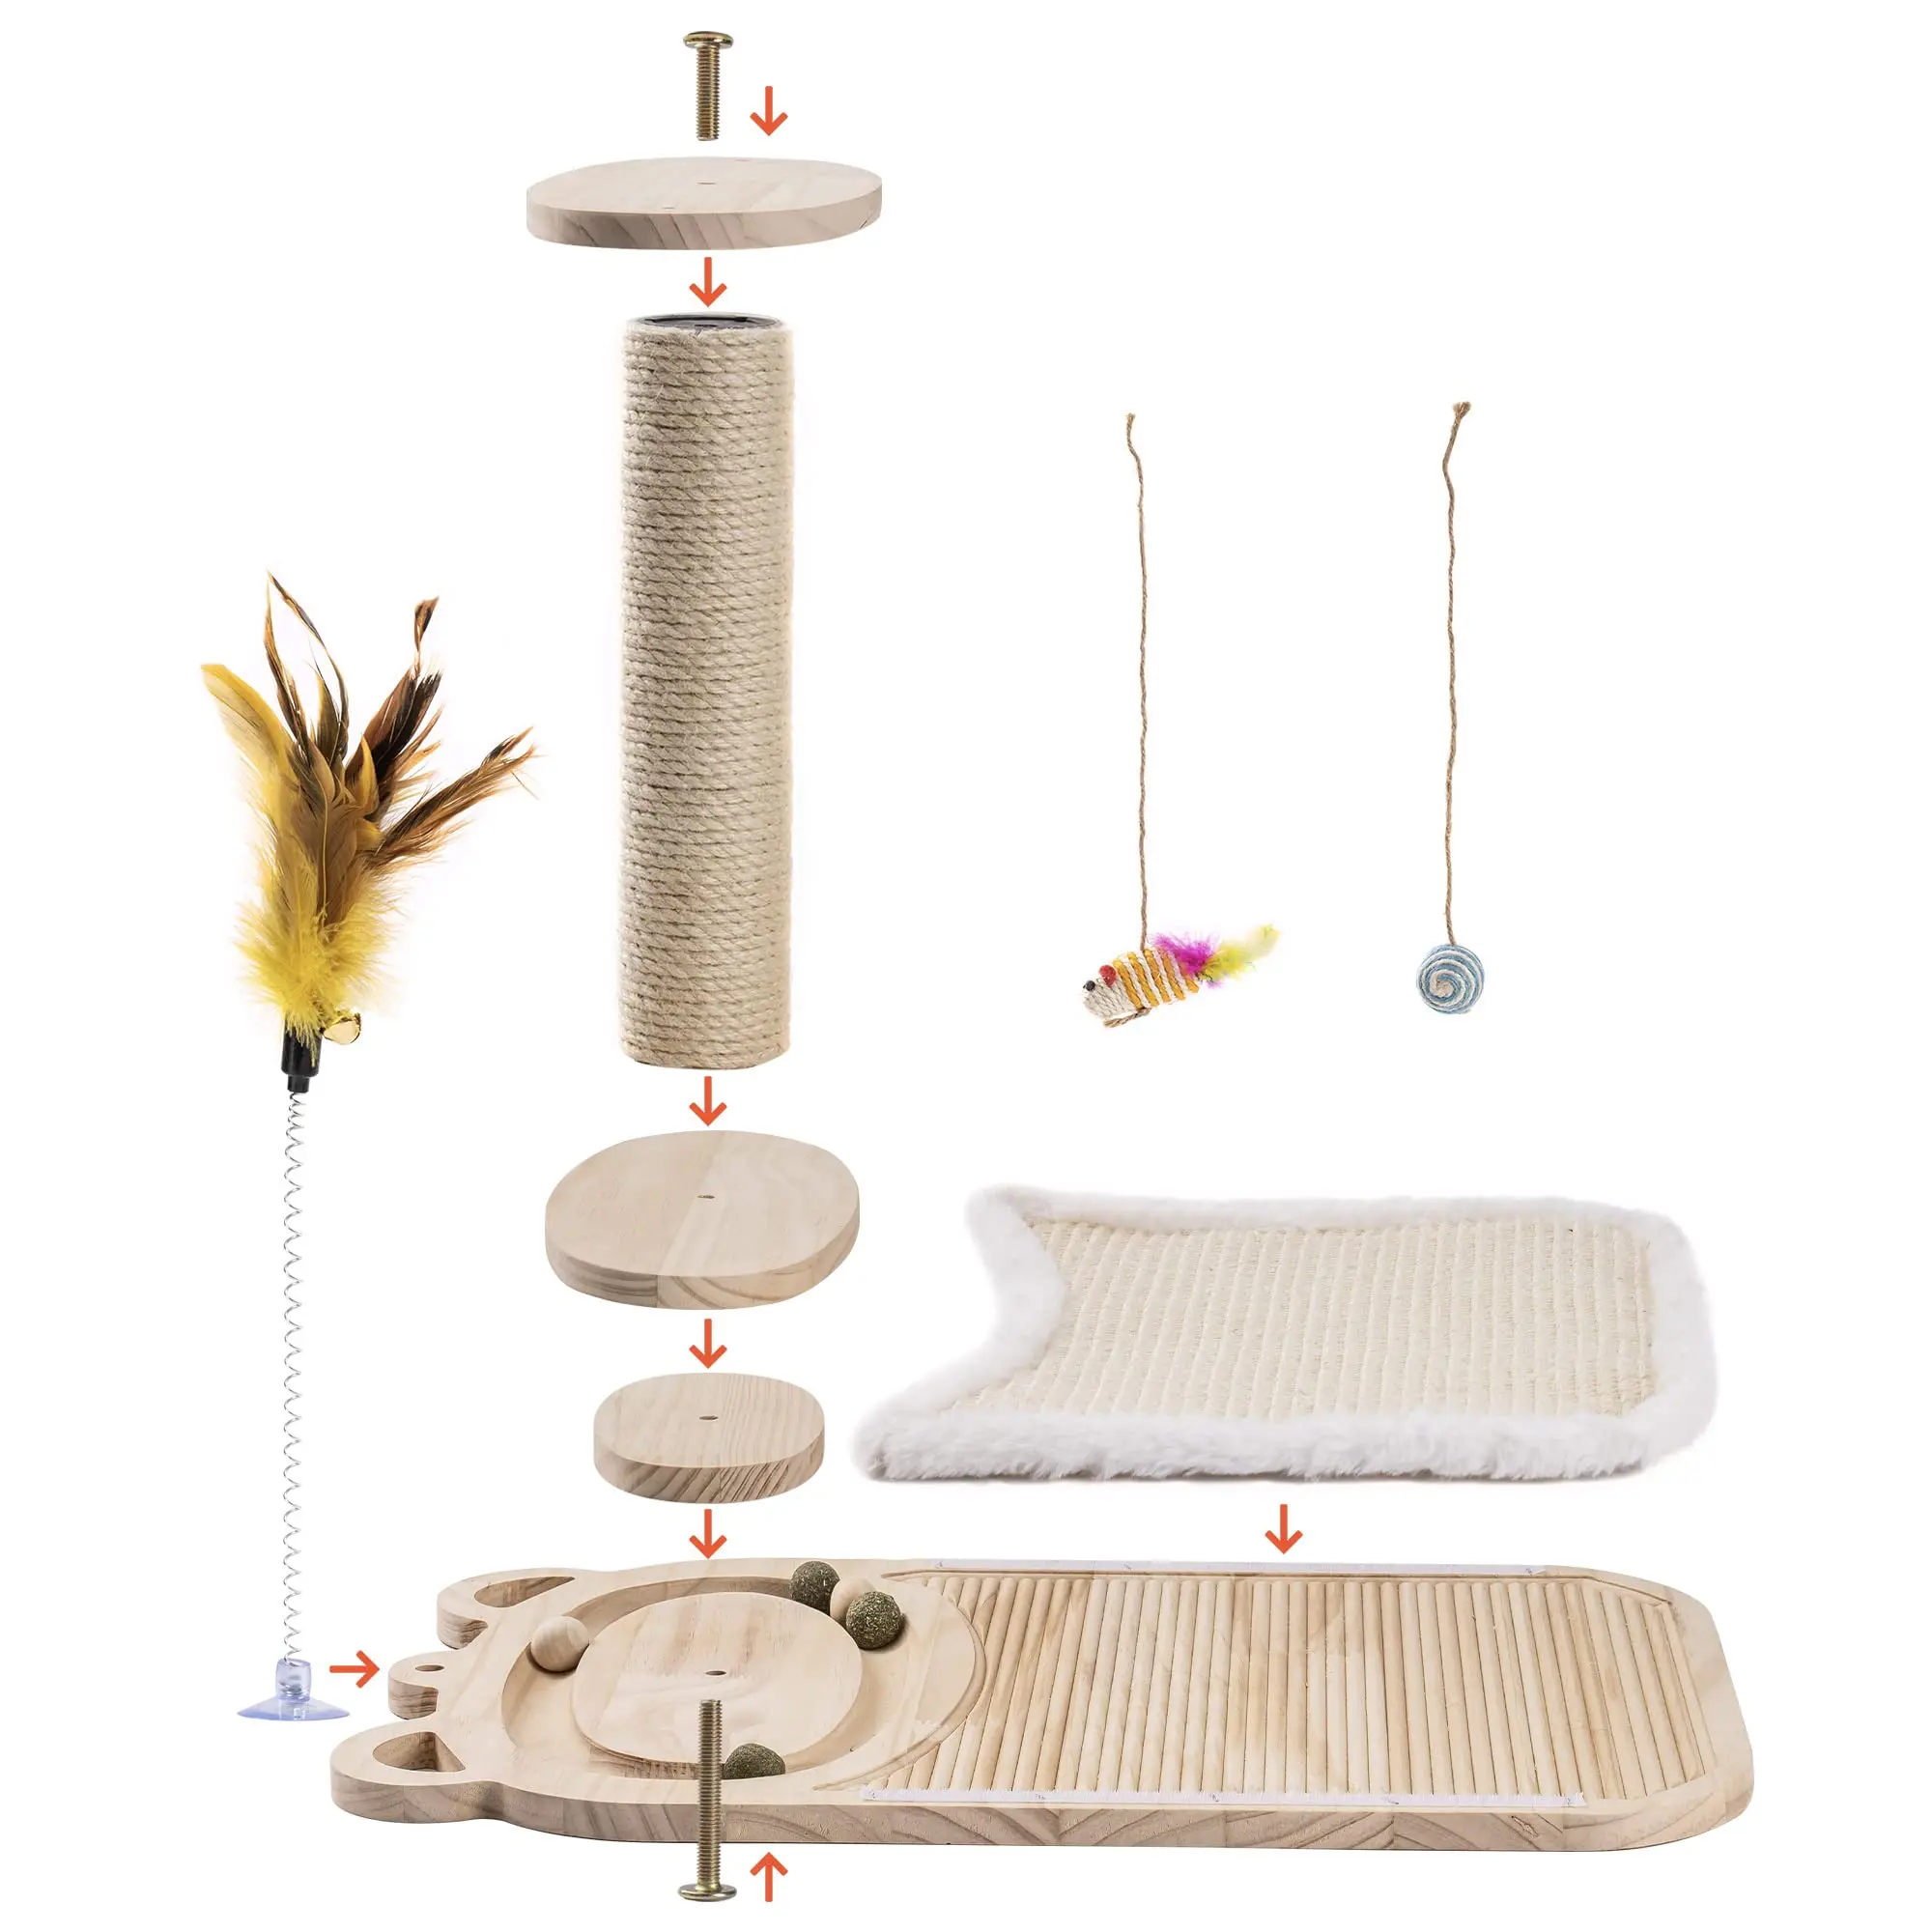 Mewoofun Cat Toy 2-Layer Turntable Cat Ball Toy Feather Stick Interactive Cat Toy Two Sisal Dangling Balls Cat Scratching Post 6